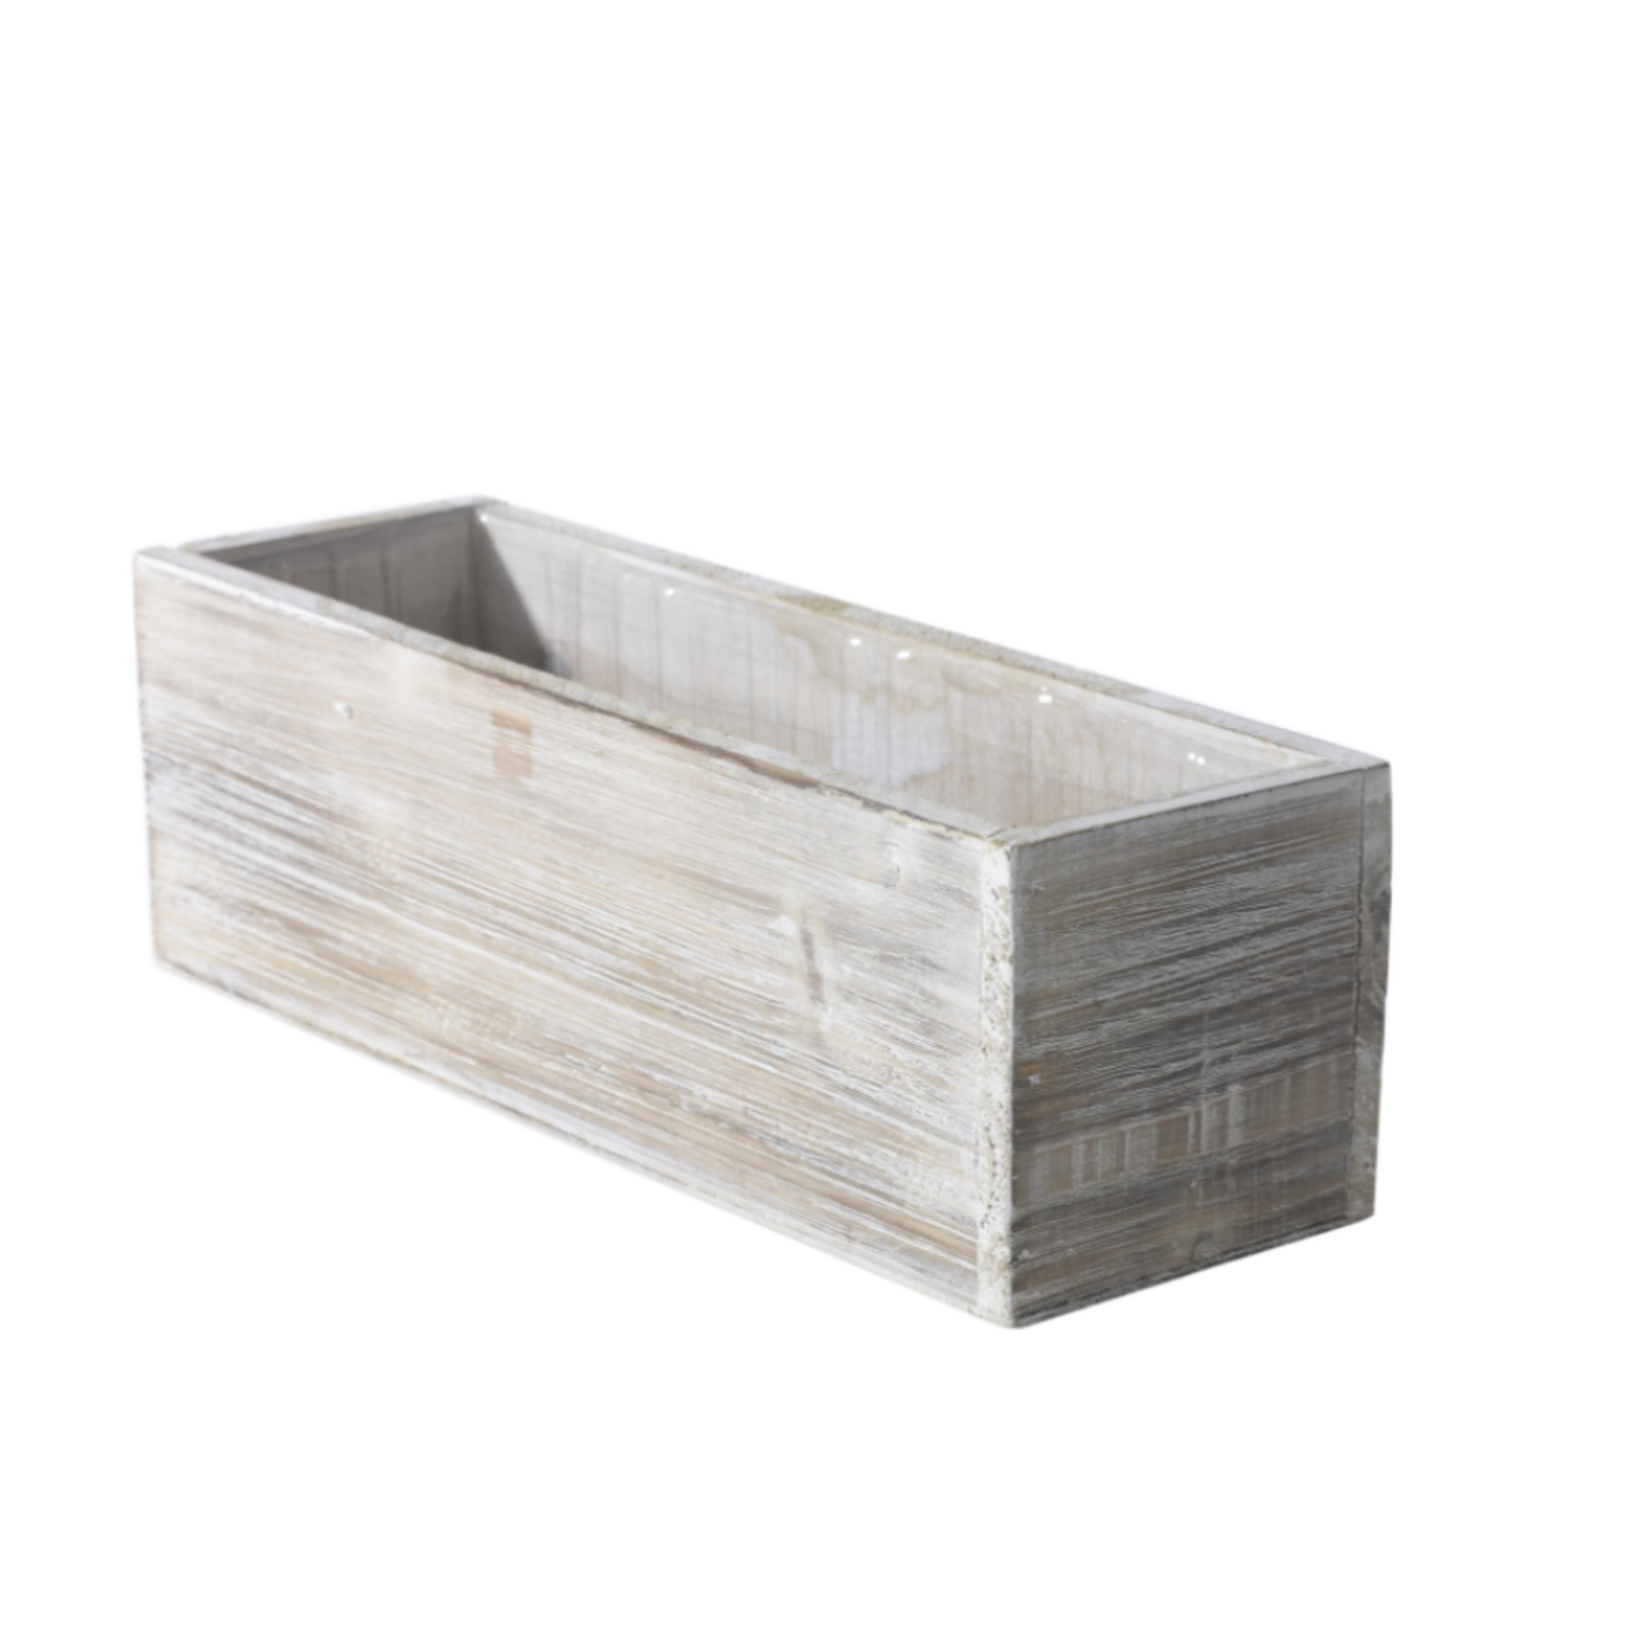 4”H X 12”L X 4” WHITE WASH LOW RECTANGLE WOODLAND PLANTER (AD)